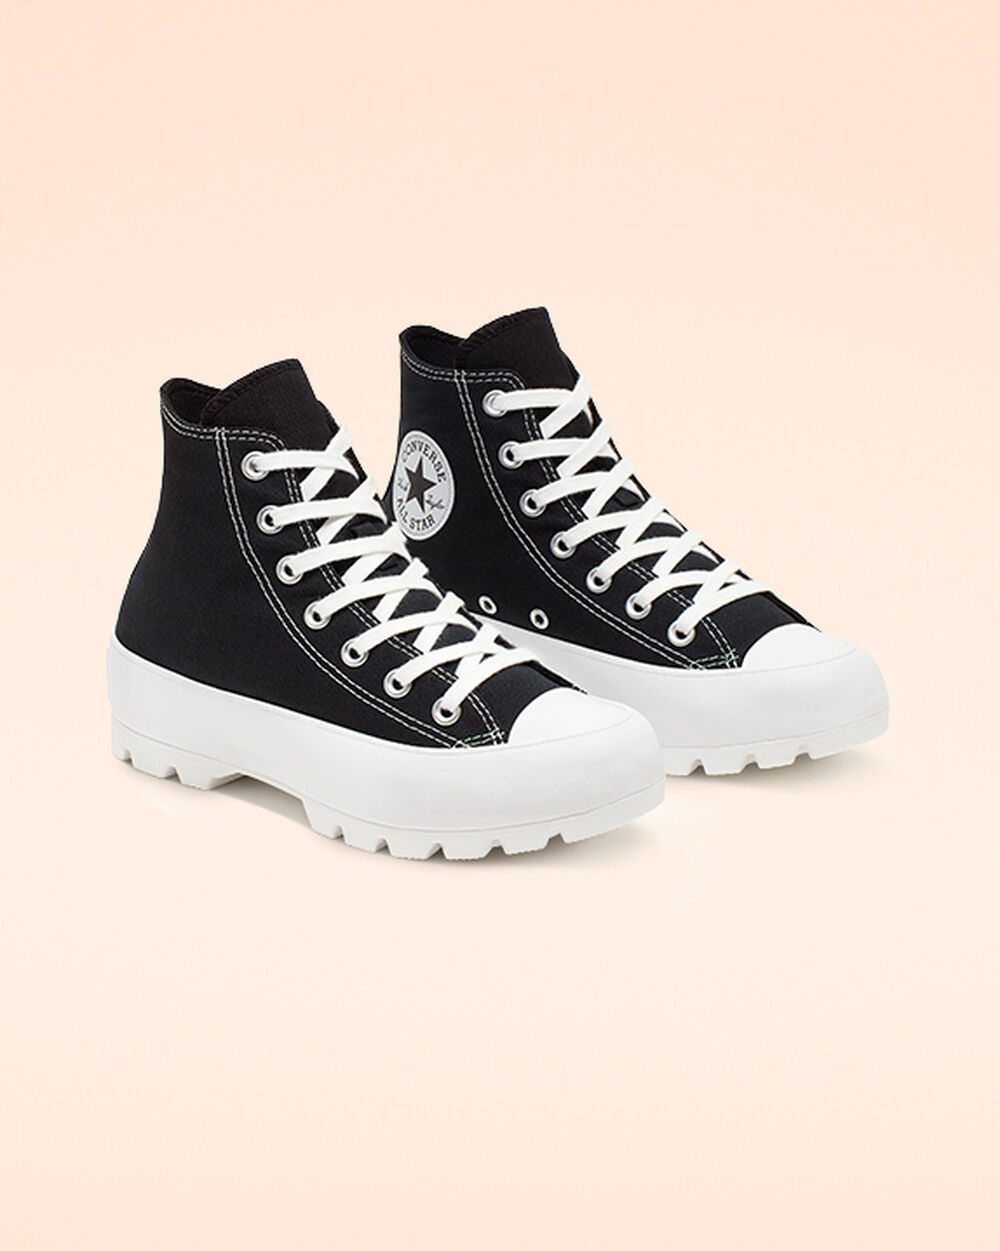 Tenis Converse Chuck Taylor All Star Lugged Mujer Negros Blancos Negros | Mexico-618466